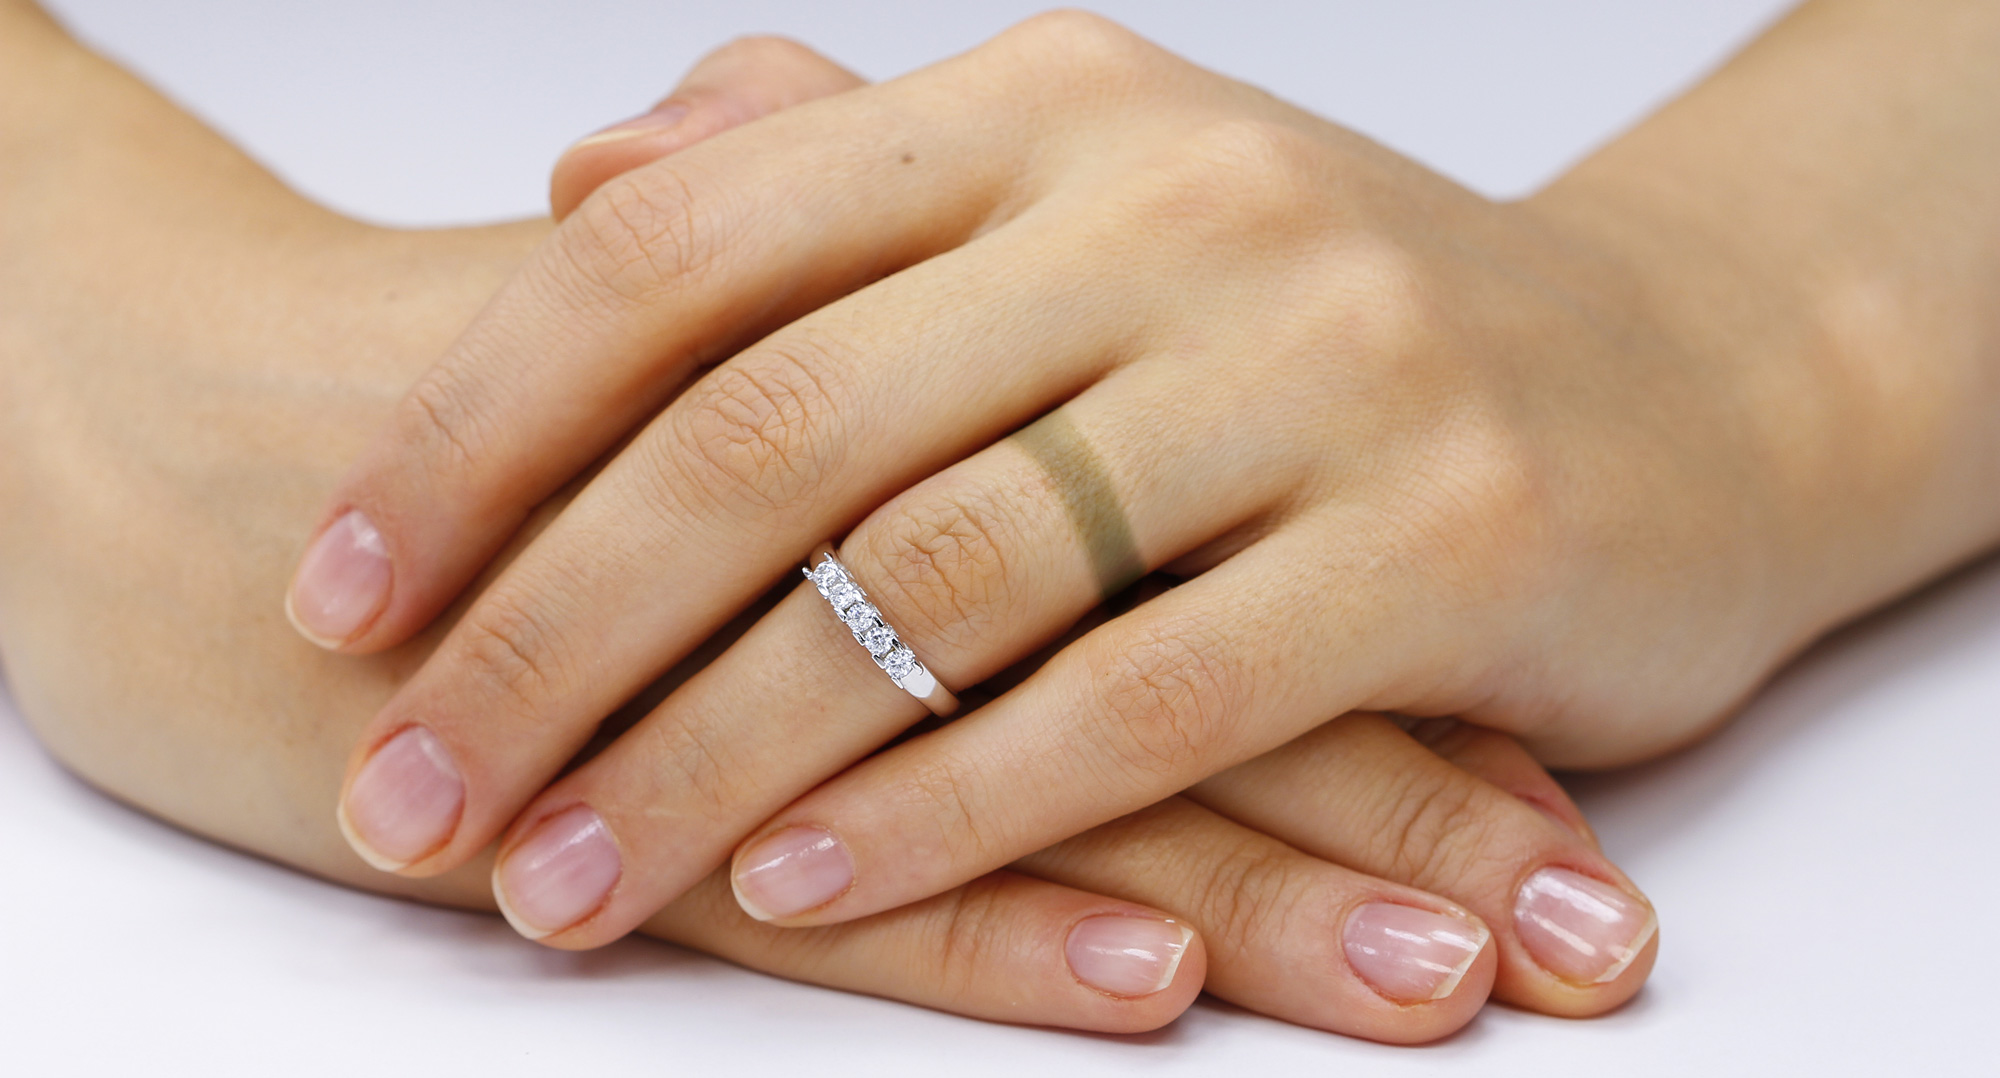 Gold Rings Turning Your Fingers Black | Ask Coast's Preferred Jewelers